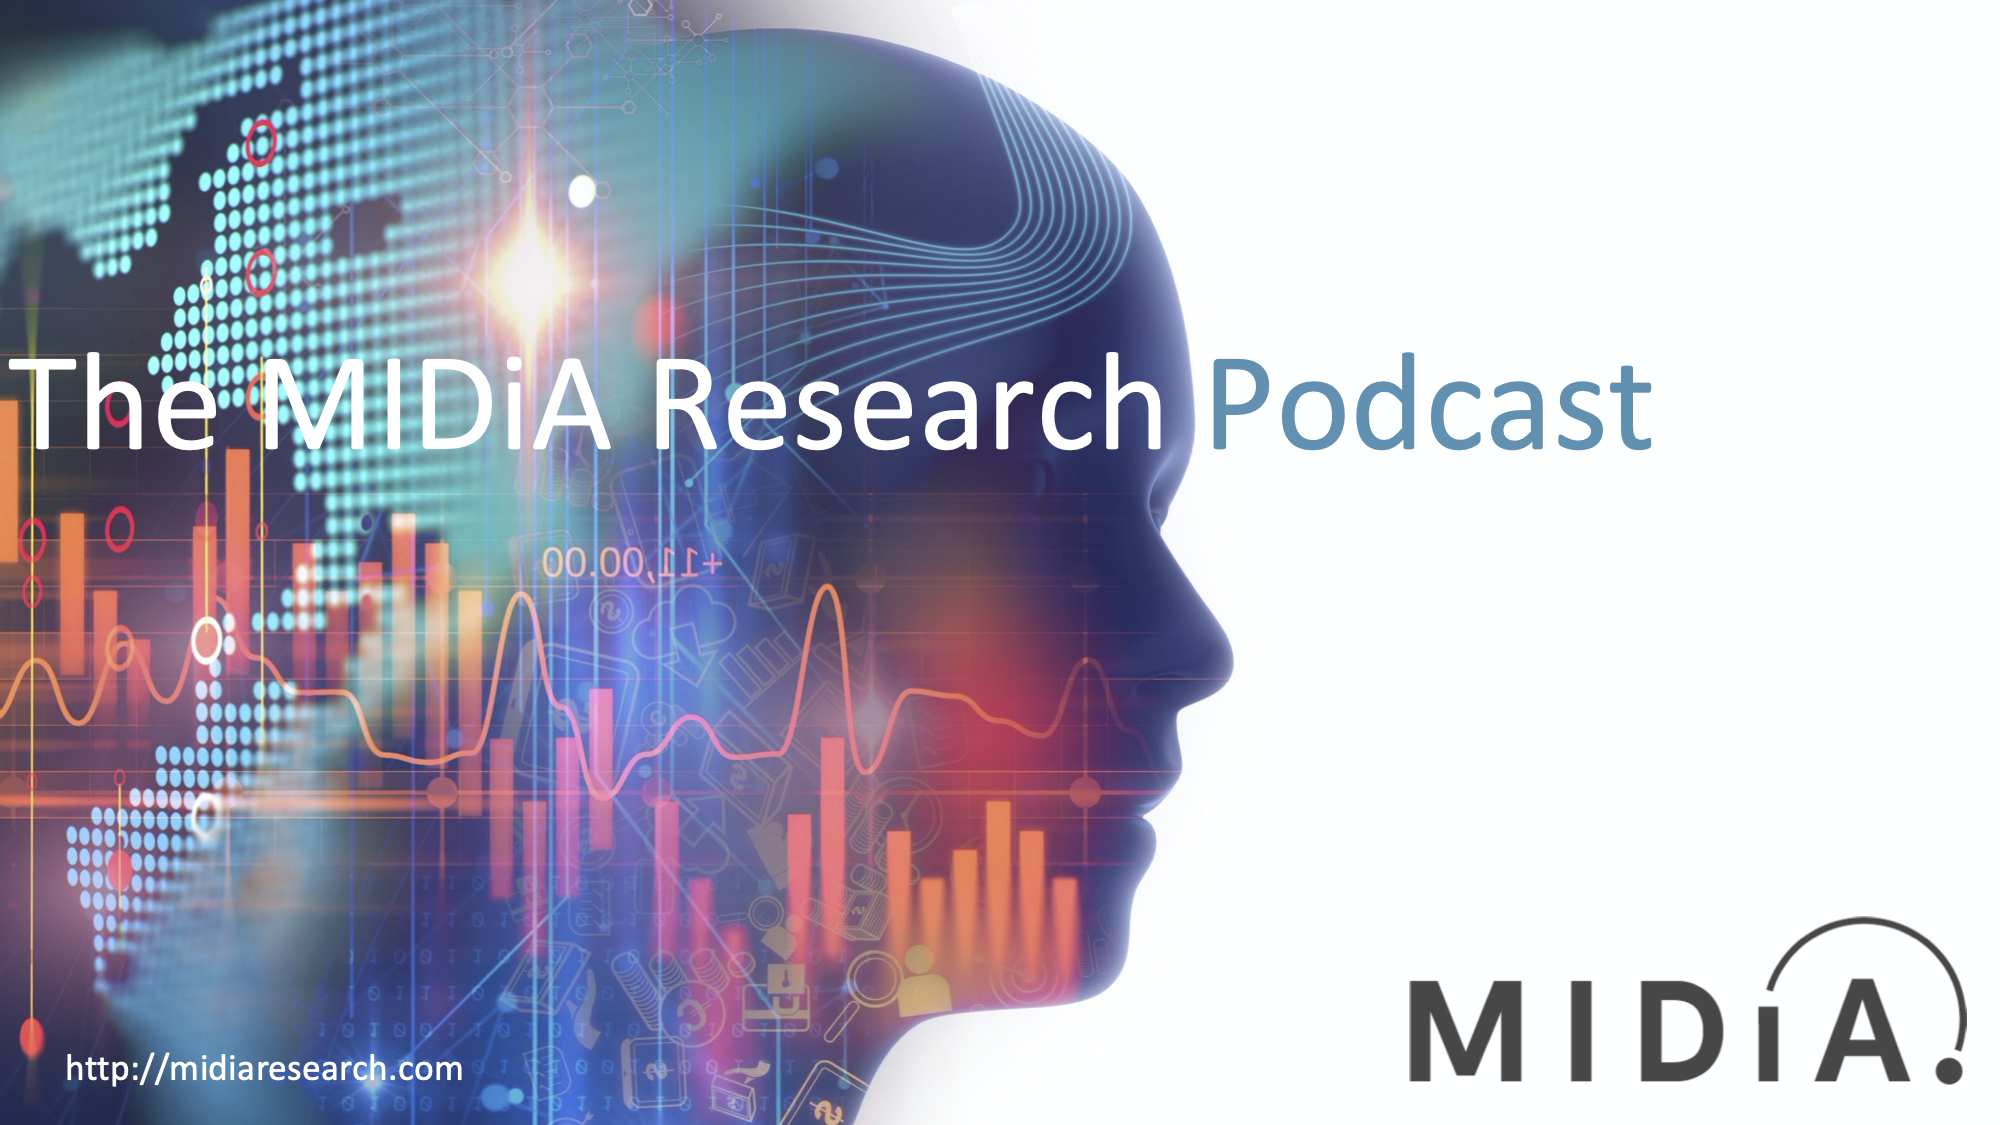 midia research podcast